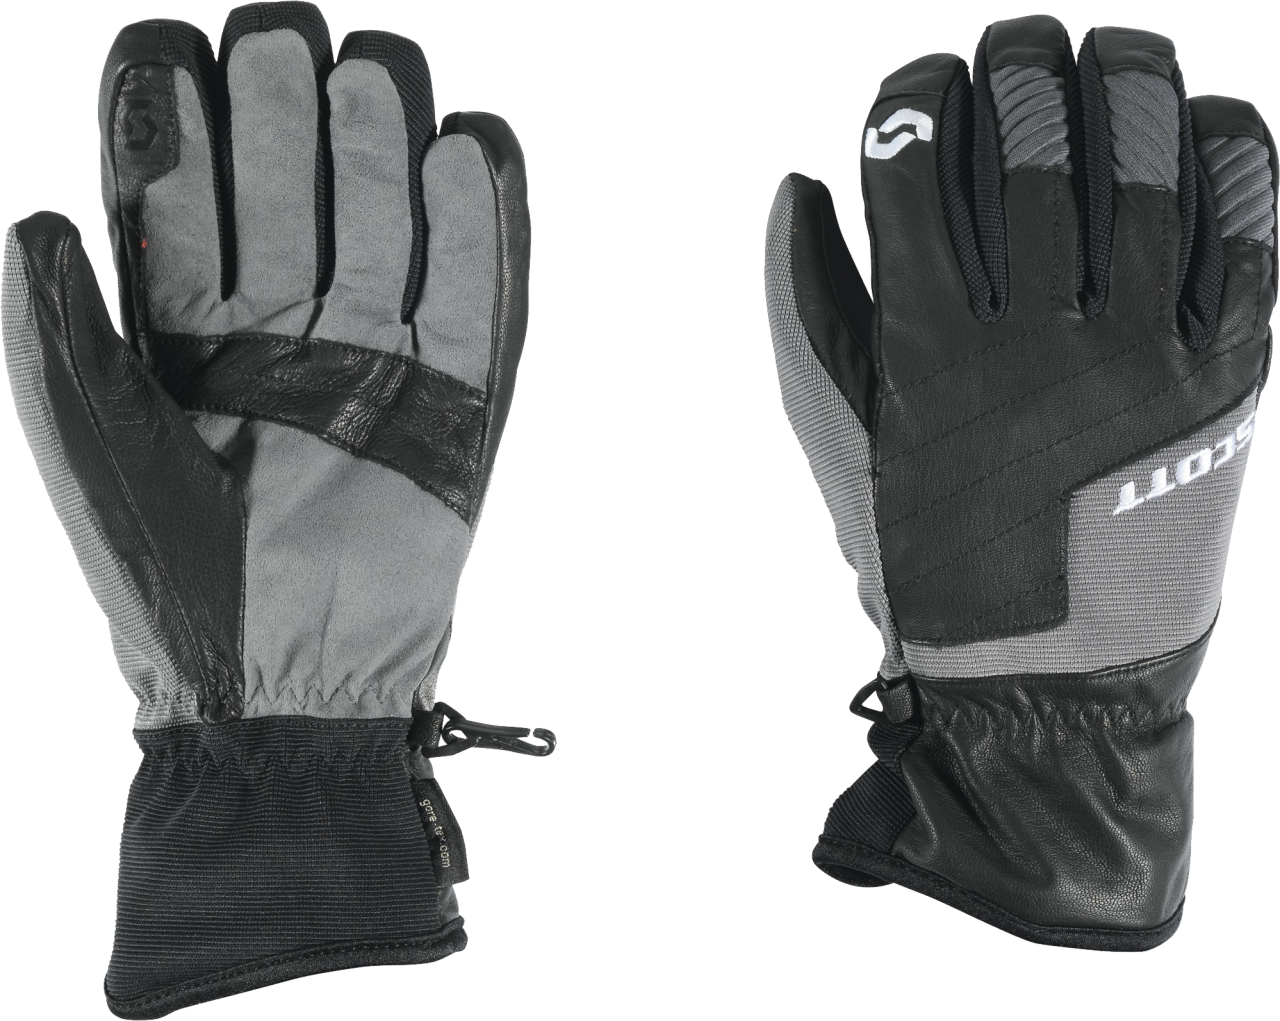 Gloves PNG Image - PurePNG | Free transparent CC0 PNG Image Library